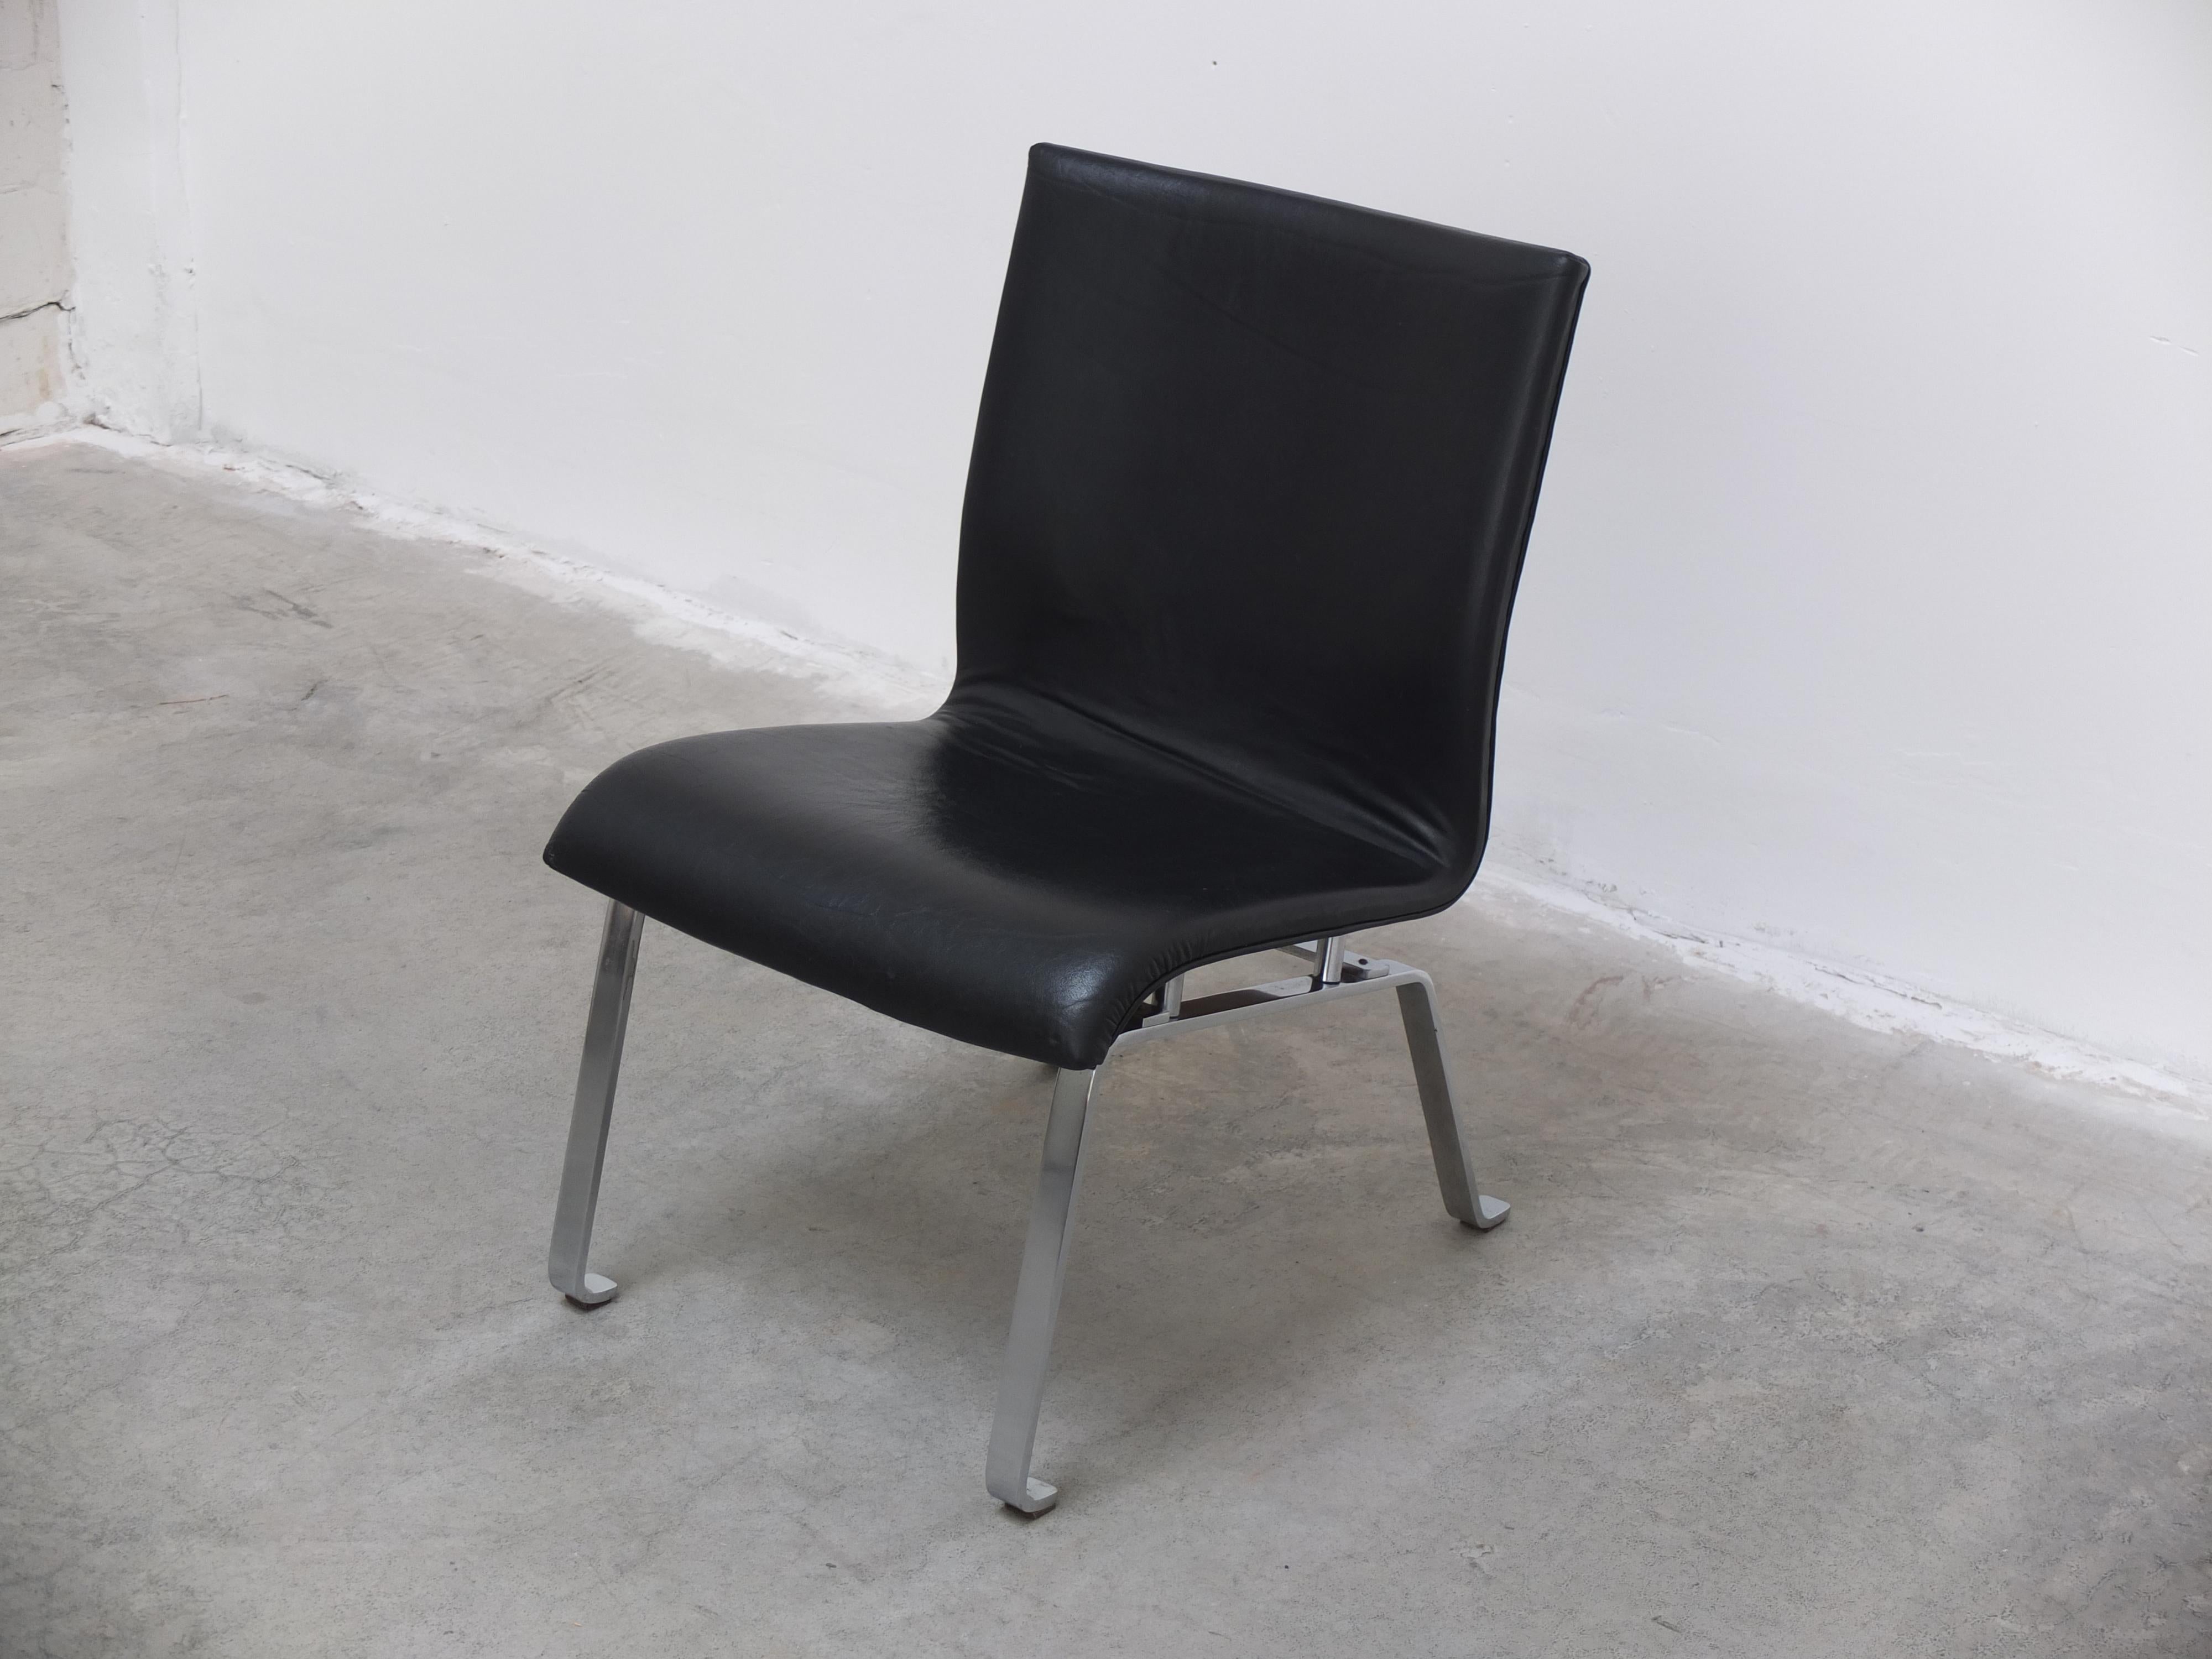 Unique Black Leather & Steel Modernist Lounge Chair, 1960s For Sale 3